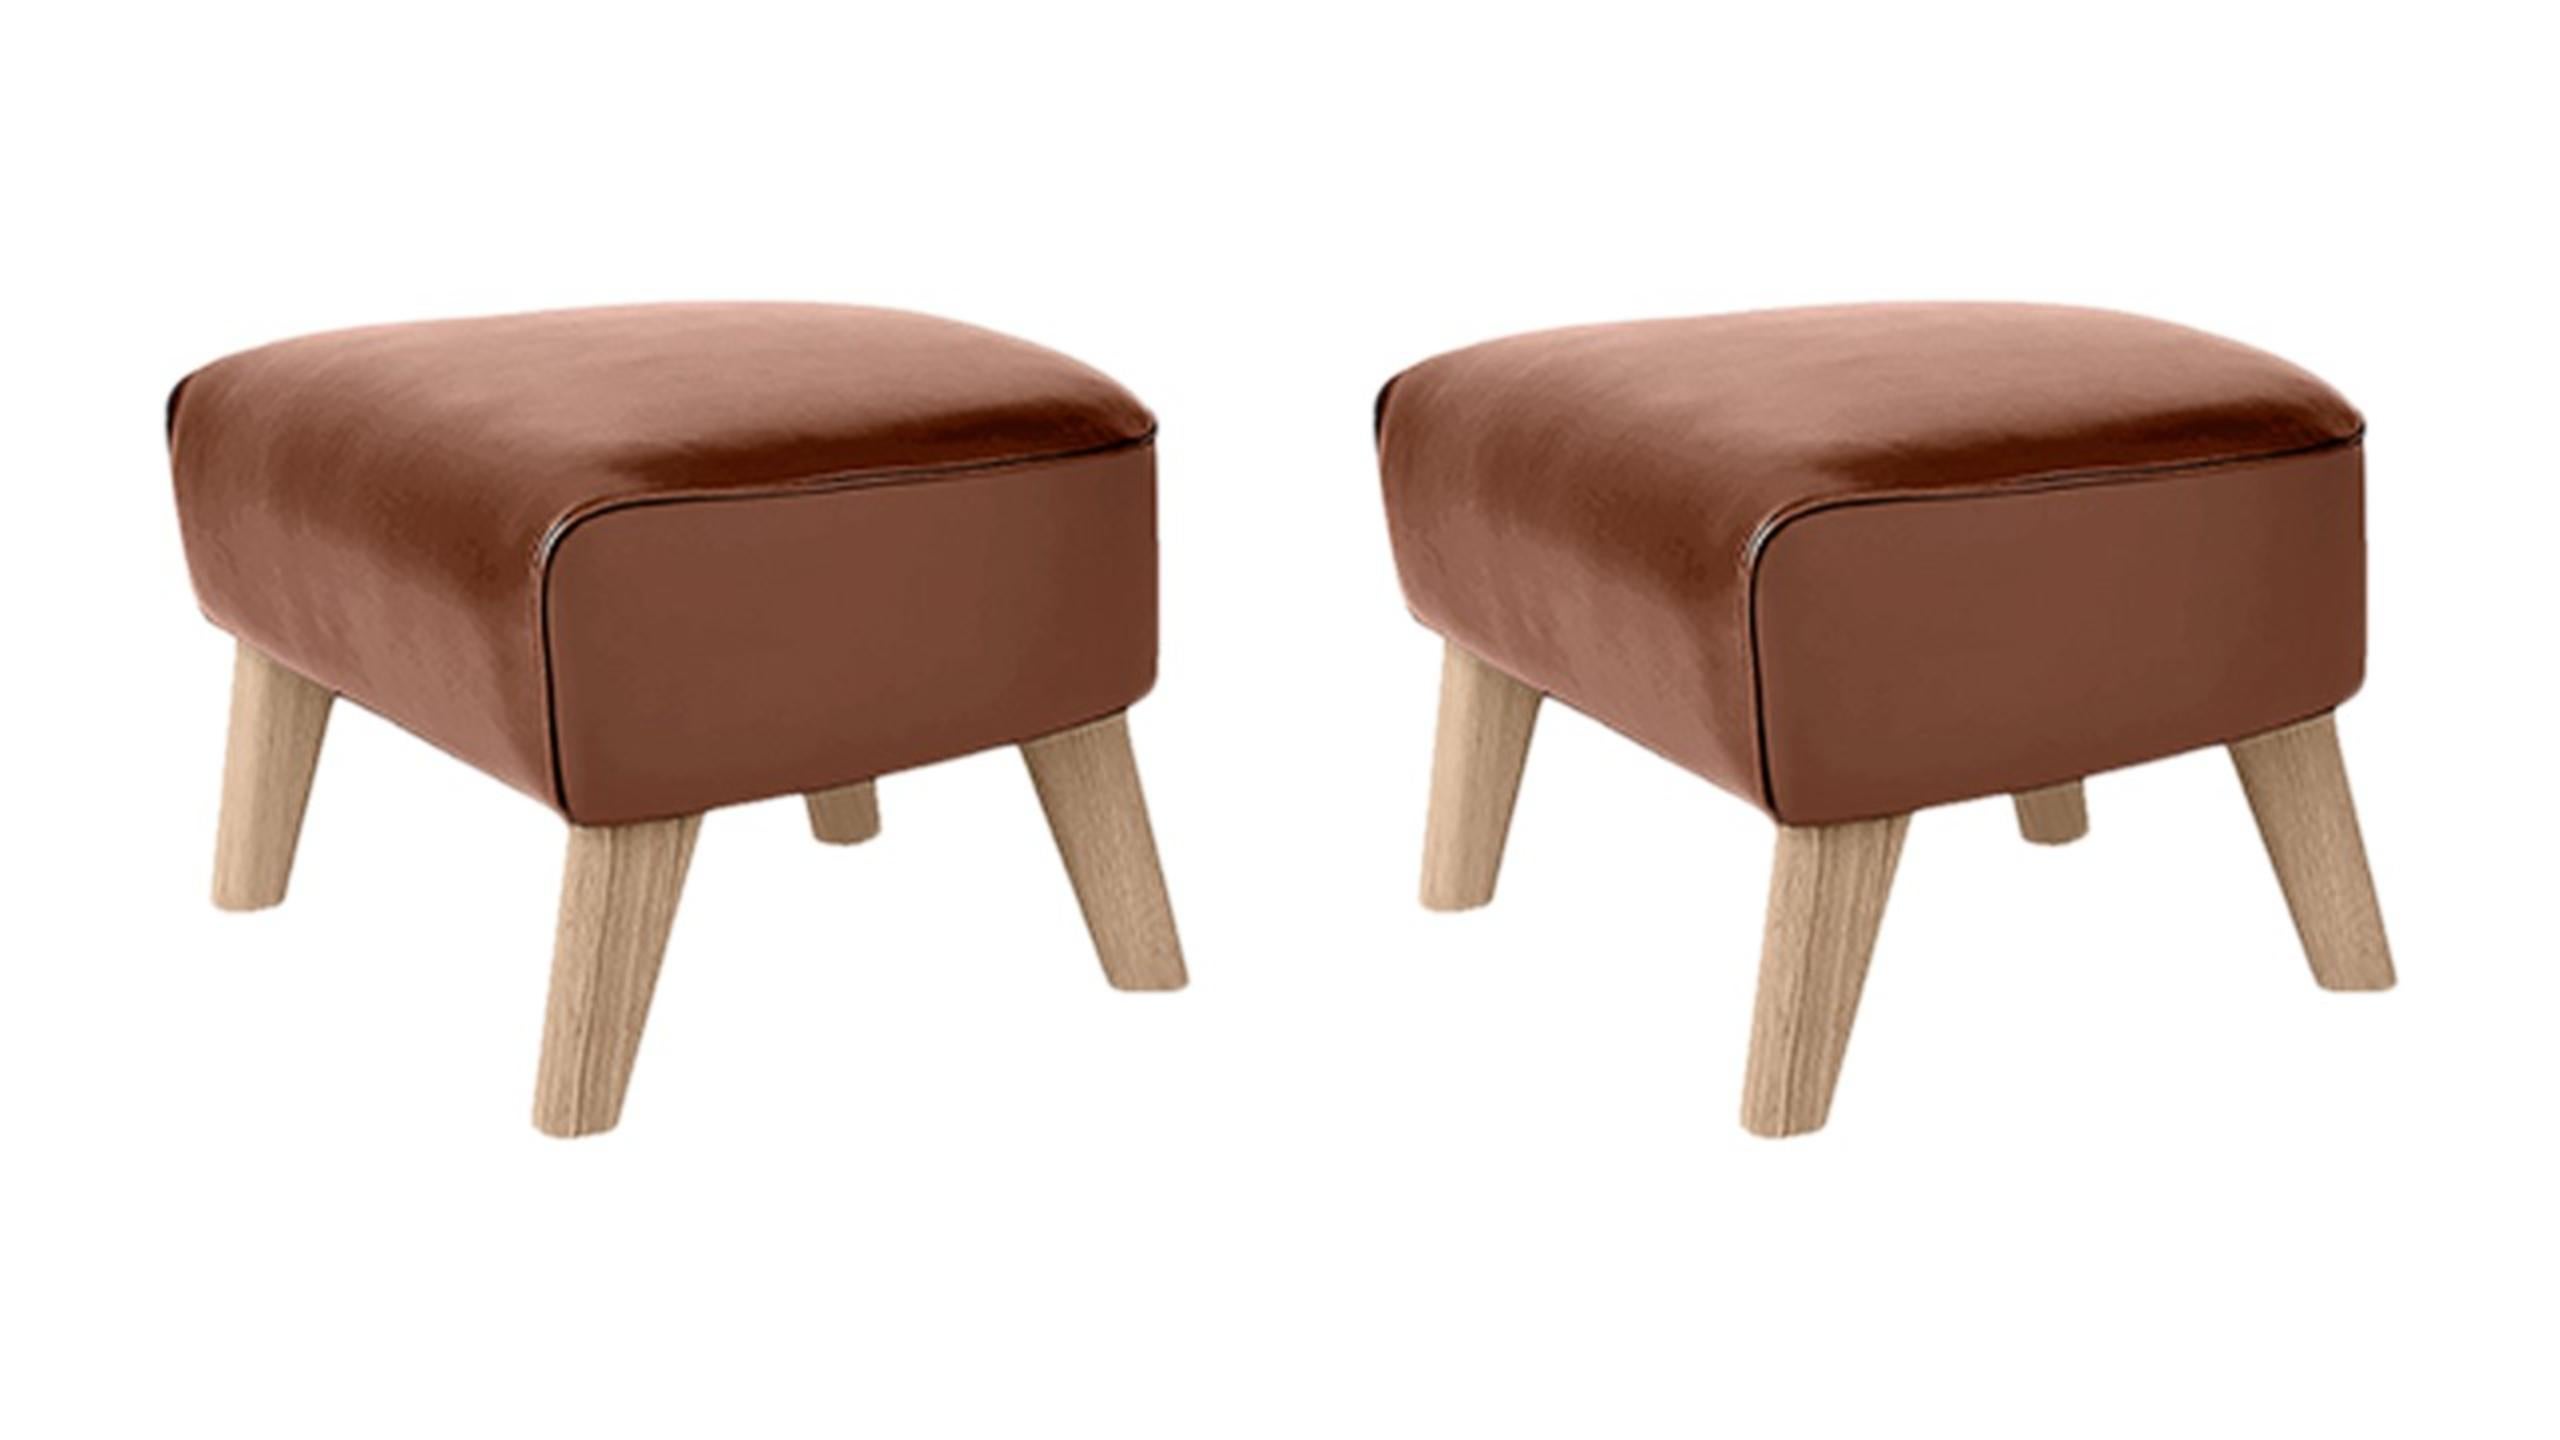 Set Of 2 Brown Leather and Natural Oak My Own Chair Footstools by Lassen
Dimensions: W 56 x D 58 x H 40 cm 
Materials: Leather

The My Own Chair Footstool has been designed in the same spirit as Flemming Lassen’s original iconic chair,